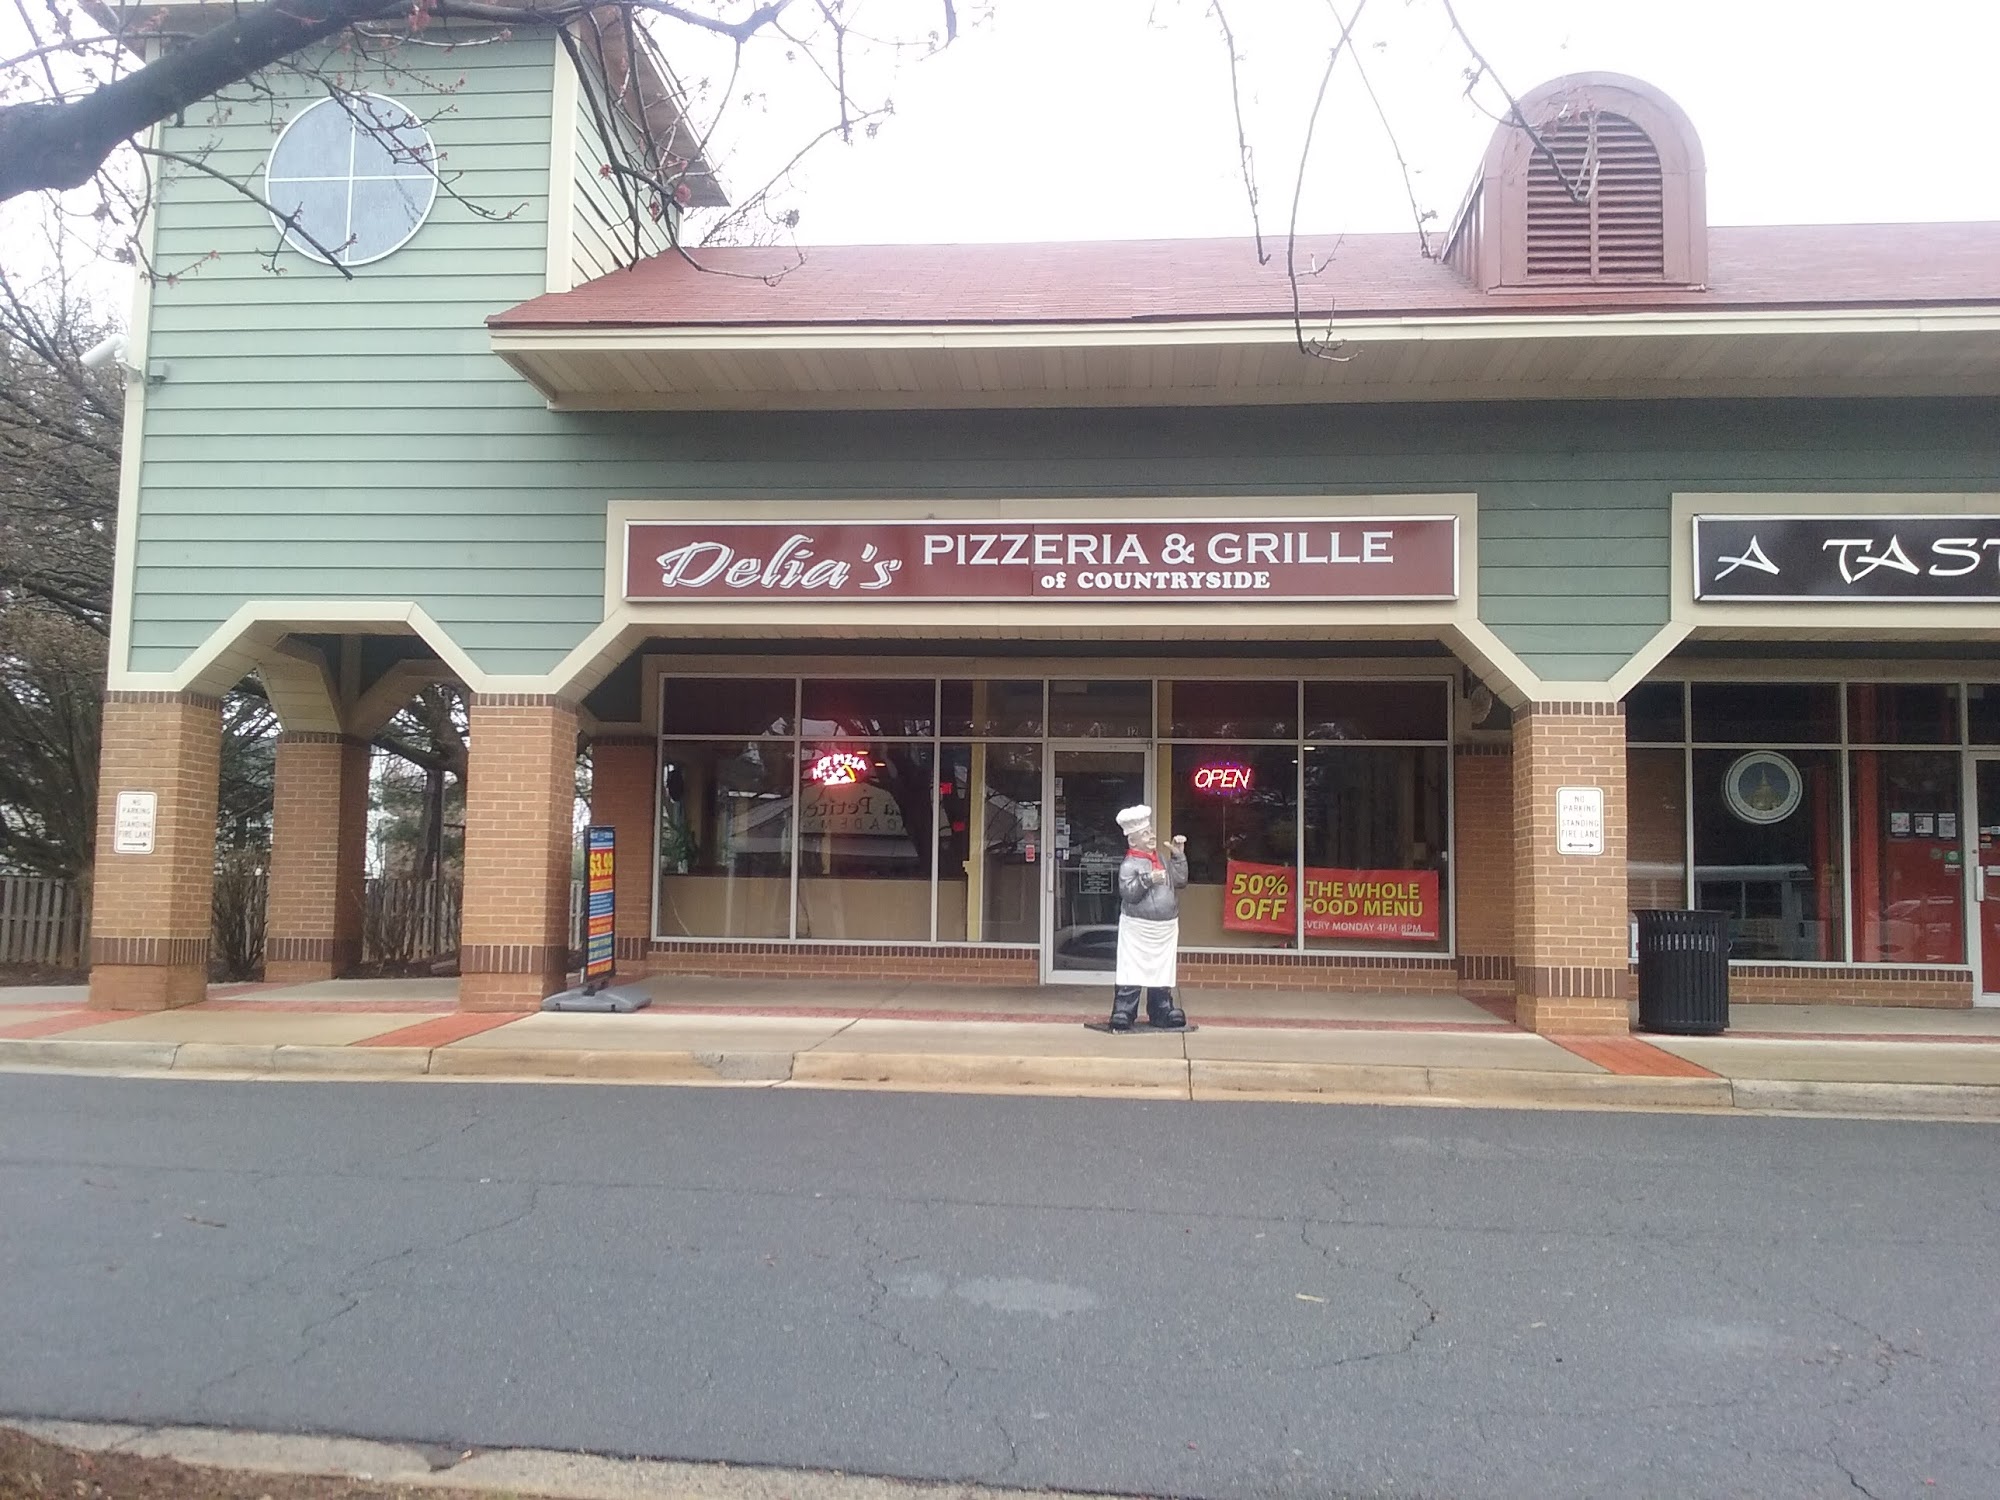 Delia's Pizzeria and Grille of Countryside